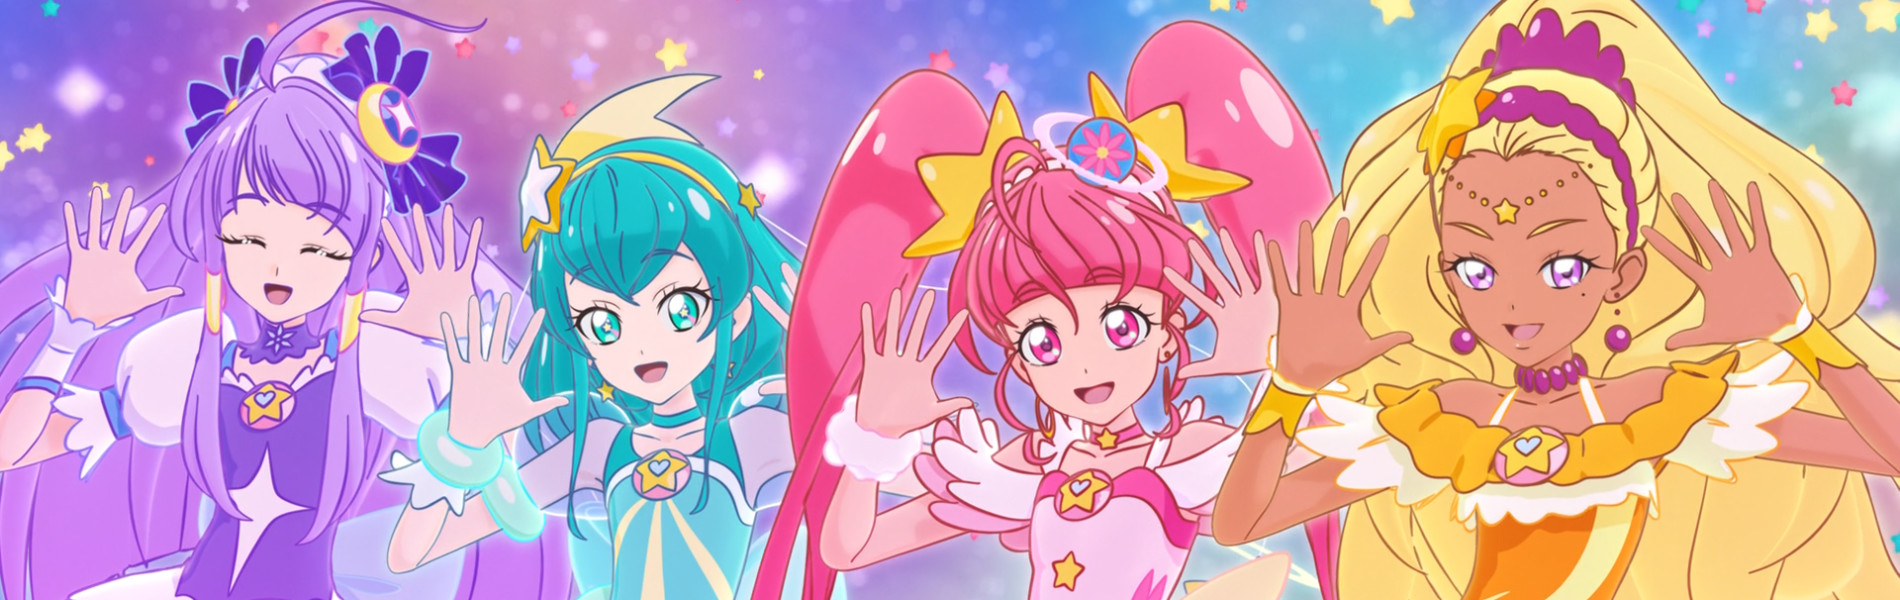 Banner for Star☆Twinkle Precure